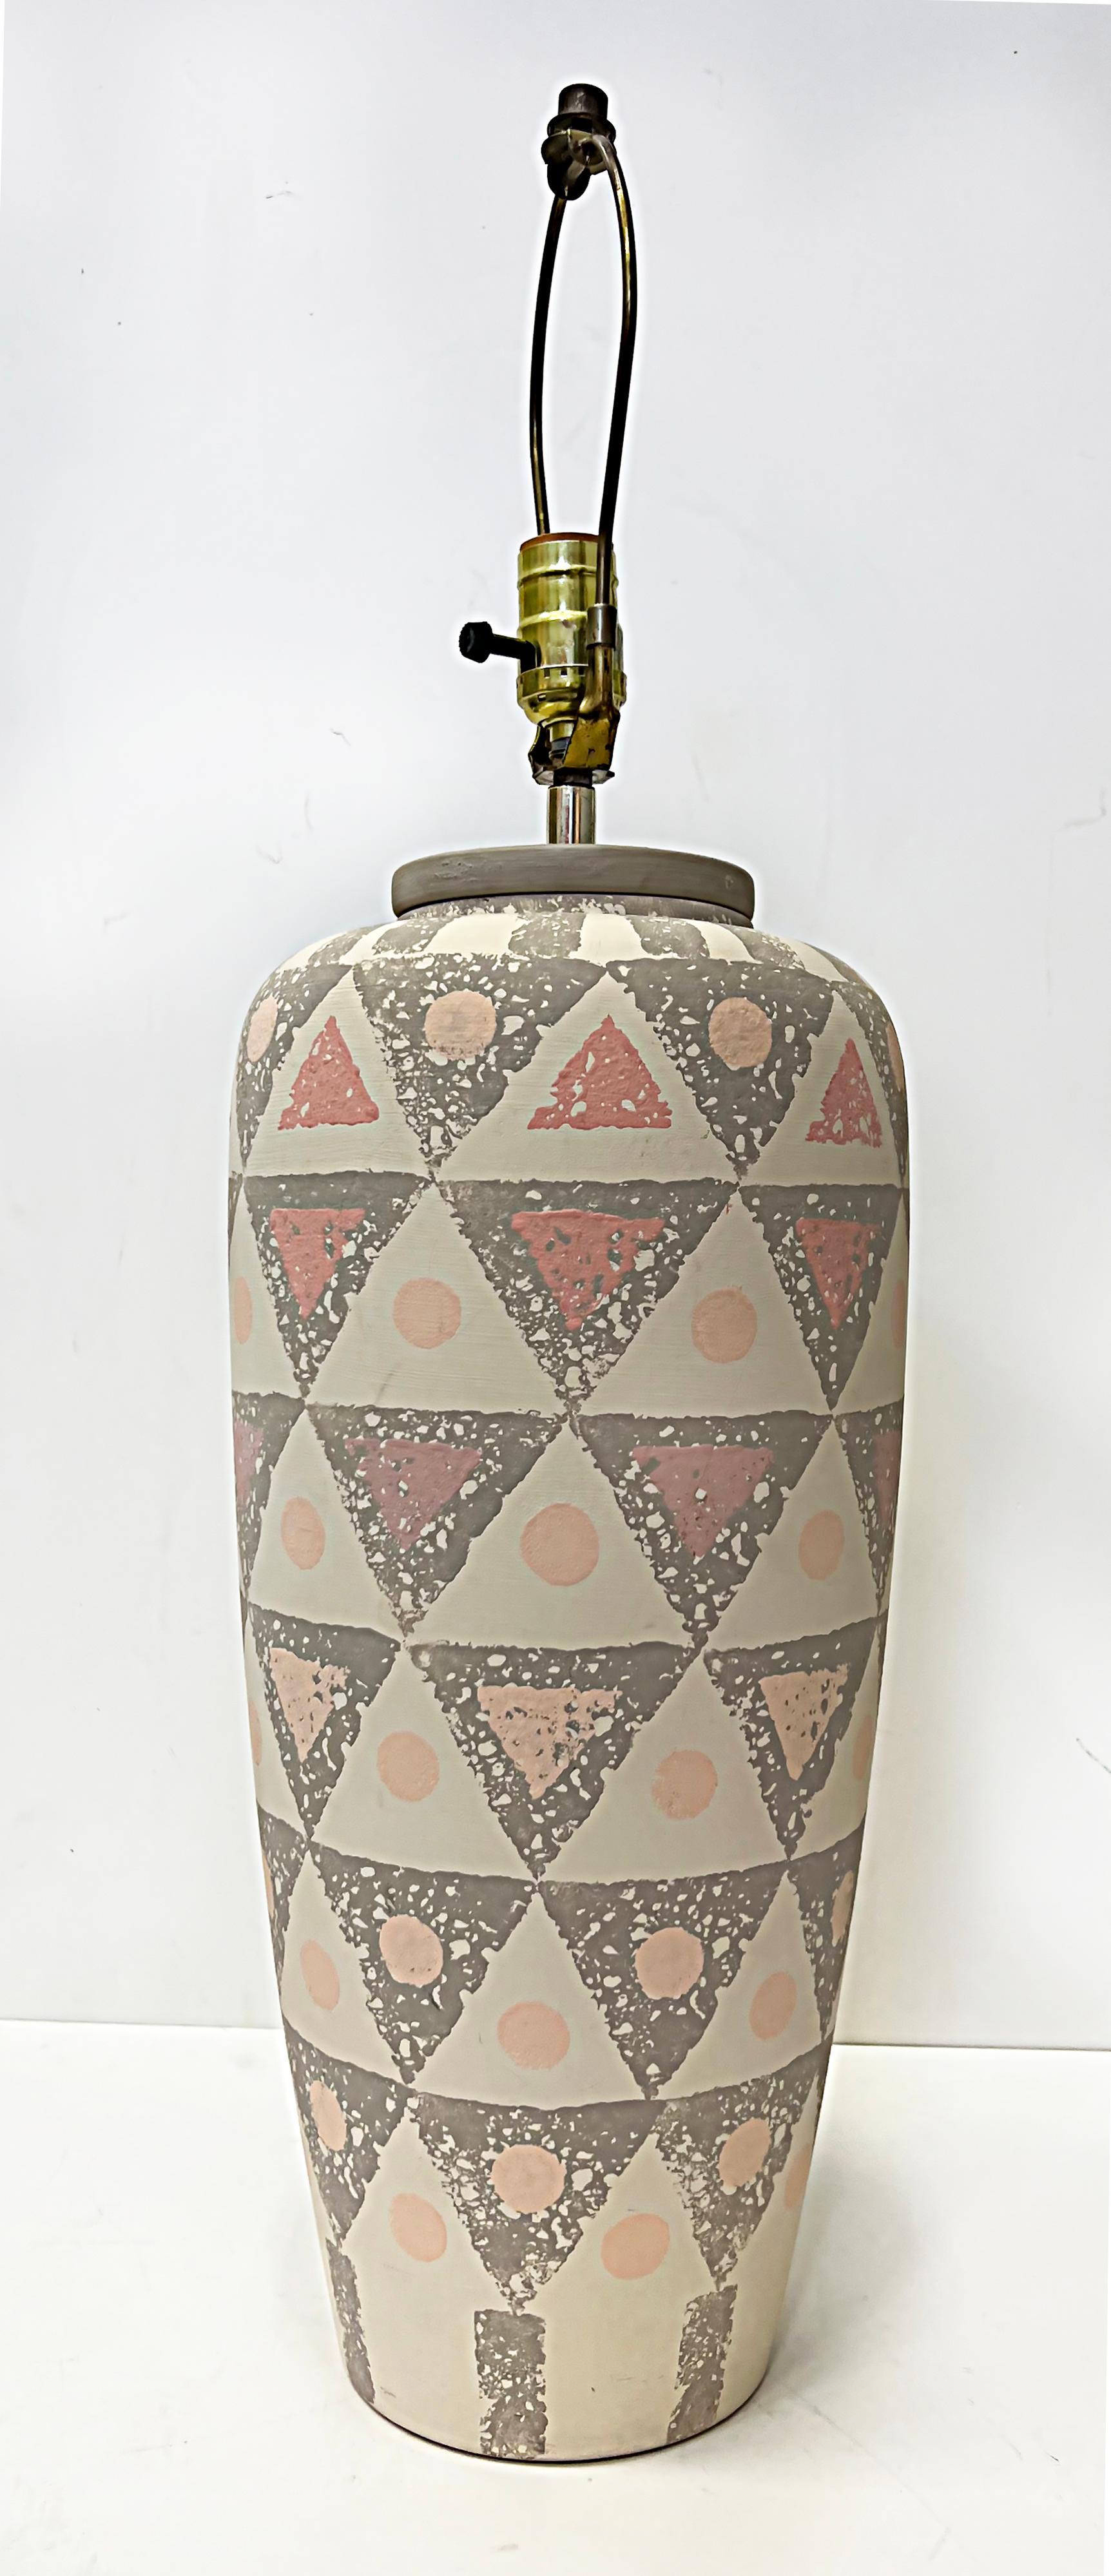 1980s Geometric hand painted designed pottery table lamps, pair.


Offered for sale is a pair of 1980s graphic design pottery table lamps that have hand-painted geometric designs. The lamps retain the original wiring that is in working condition.